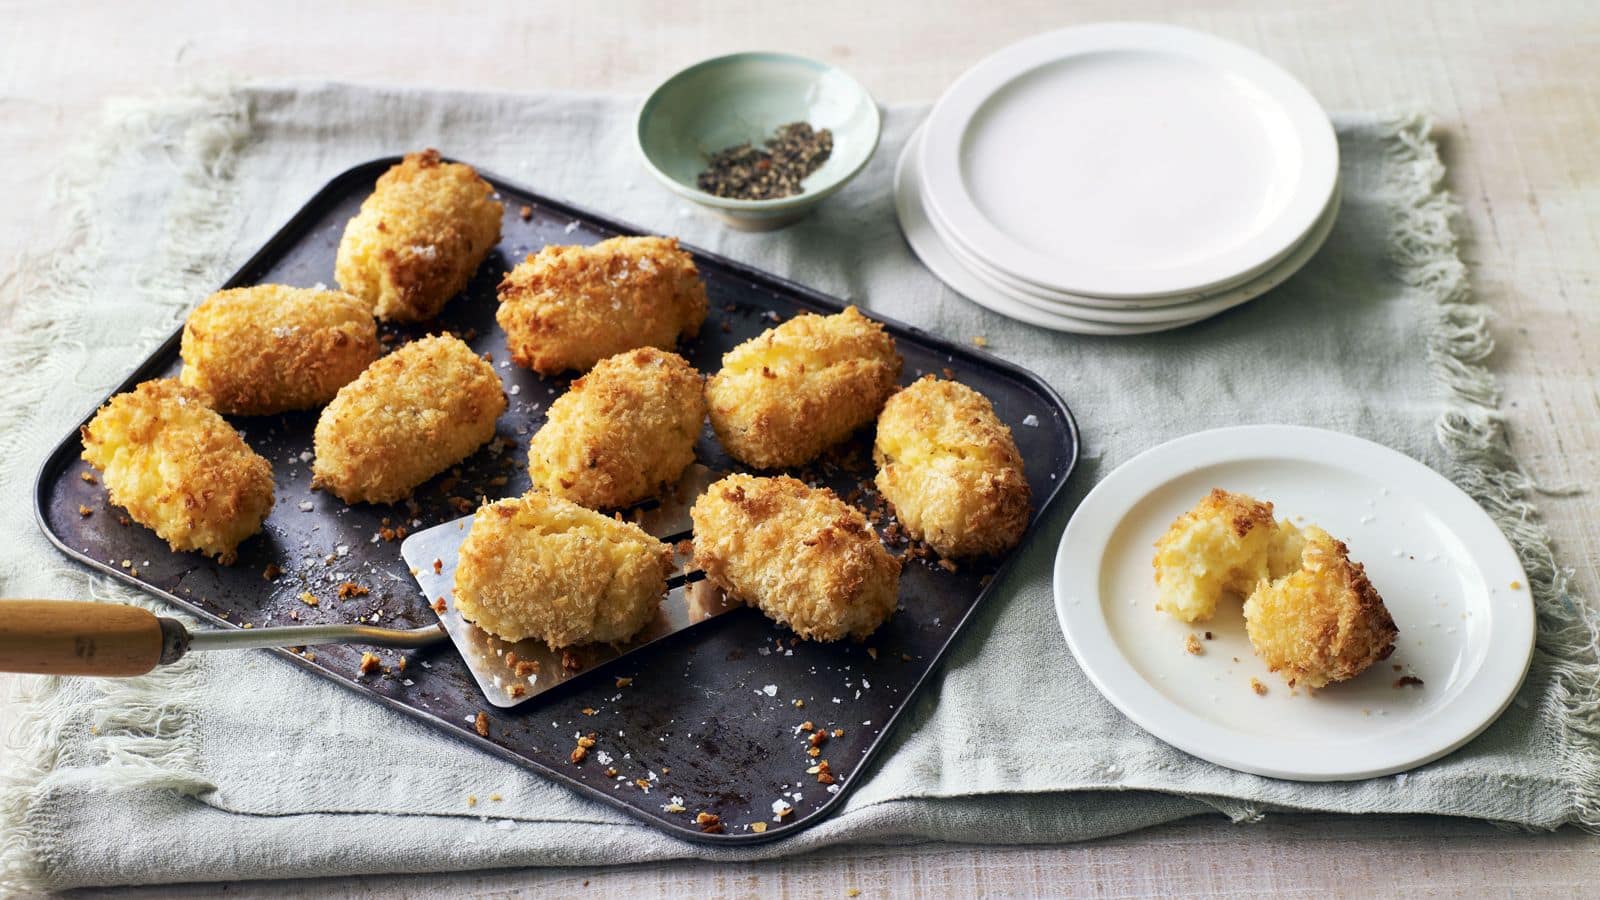 It's recipe time! Cook tempting Belgian leek croquettes at home